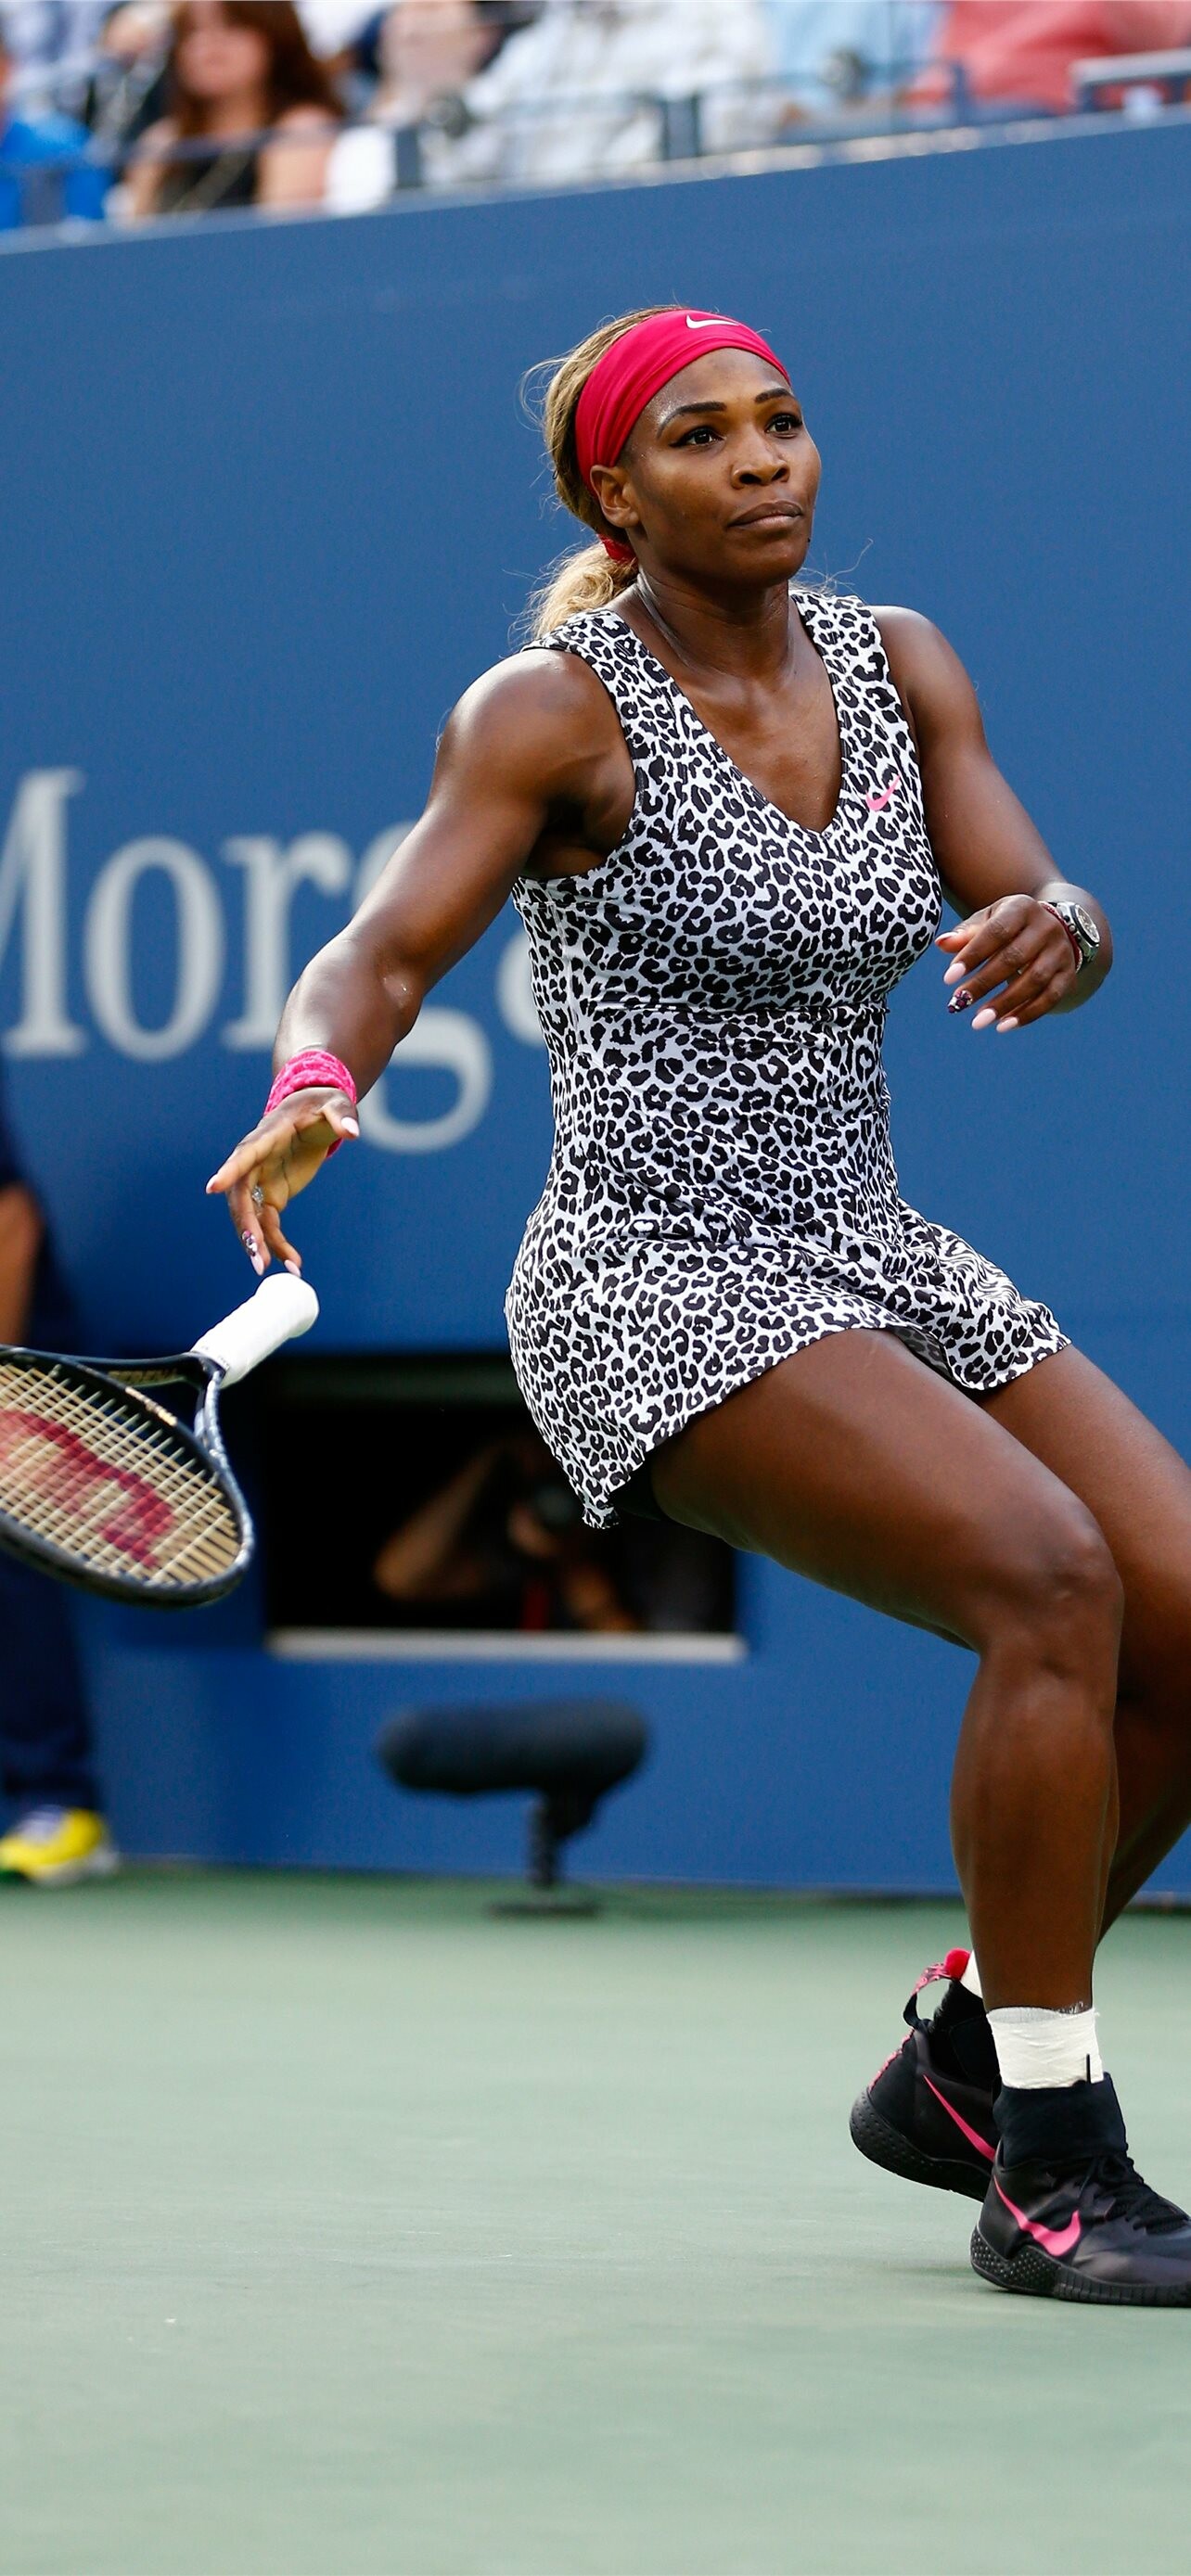 Serena Williams: Won the gold medal in women's singles tennis at the 2012 Summer Olympics. 1290x2780 HD Background.